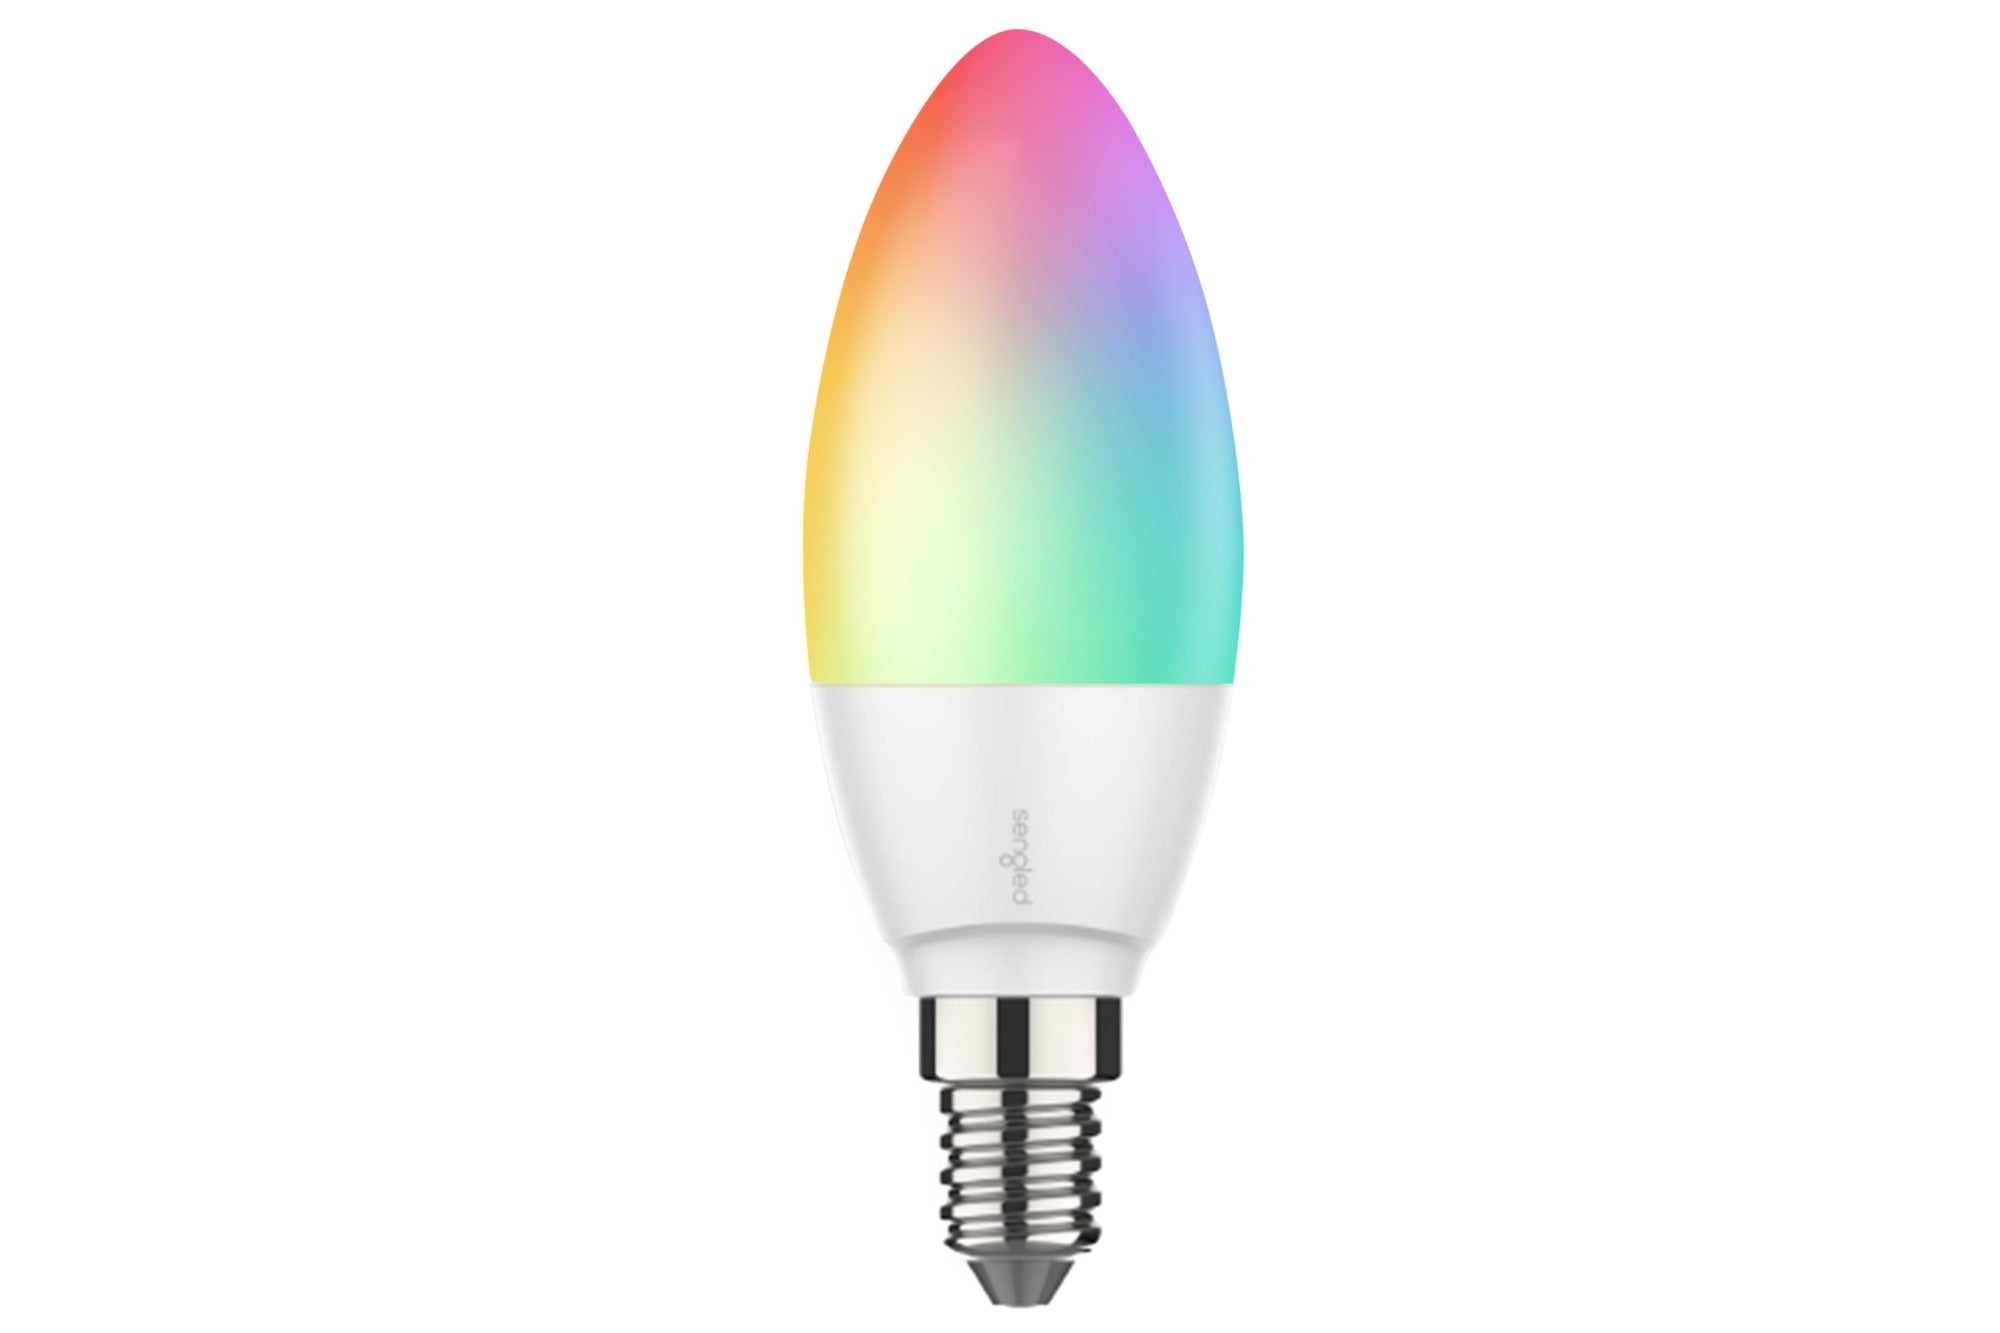 Sengled adds Edison-style filament and E12 candle bulbs to its smart